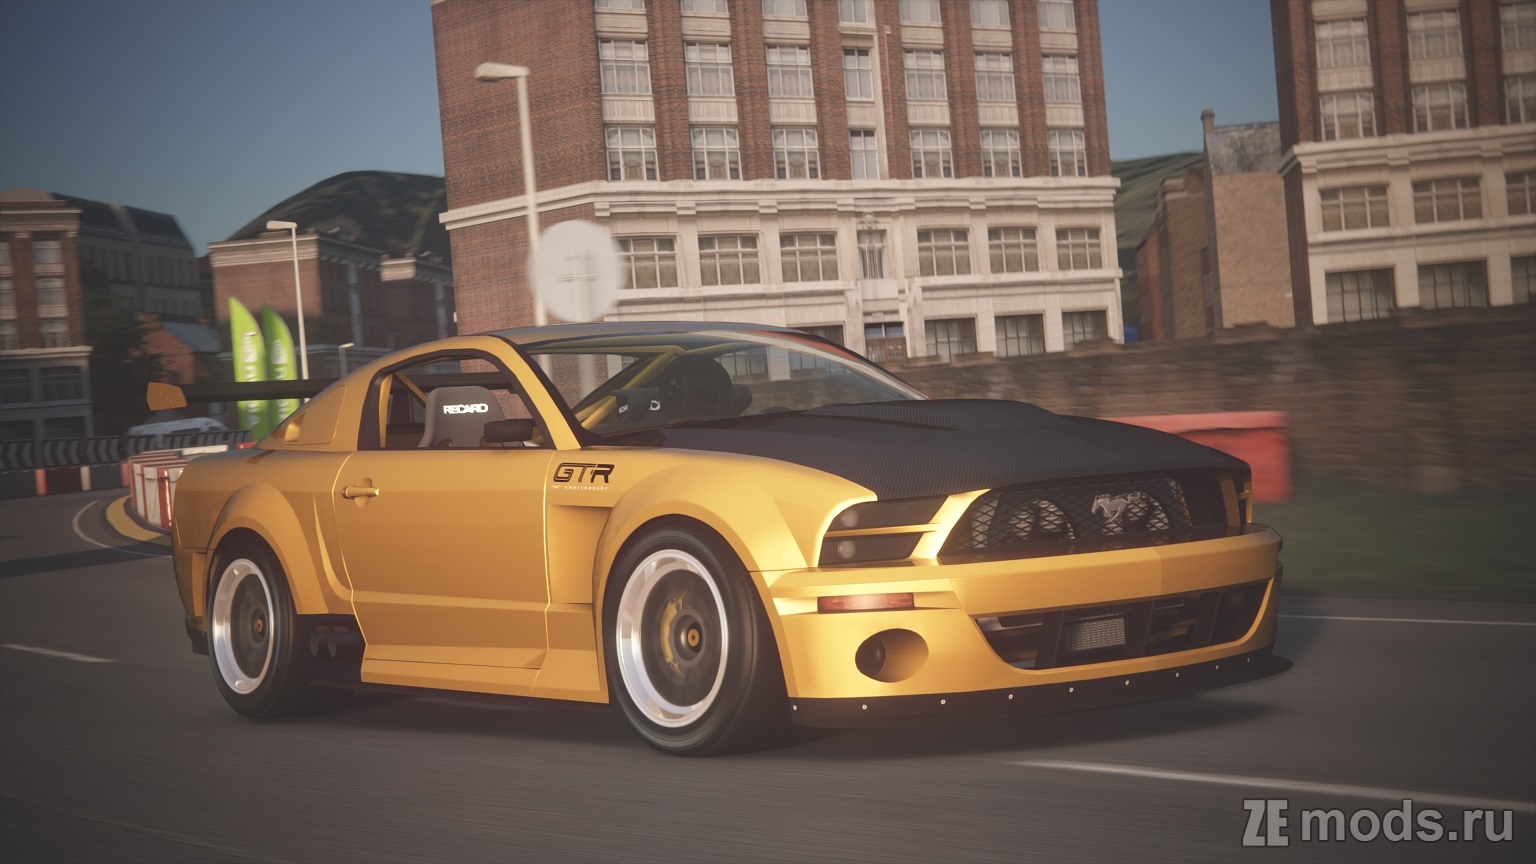 Ford Mustang GT-R Concept (v1.2) для Assetto Corsa